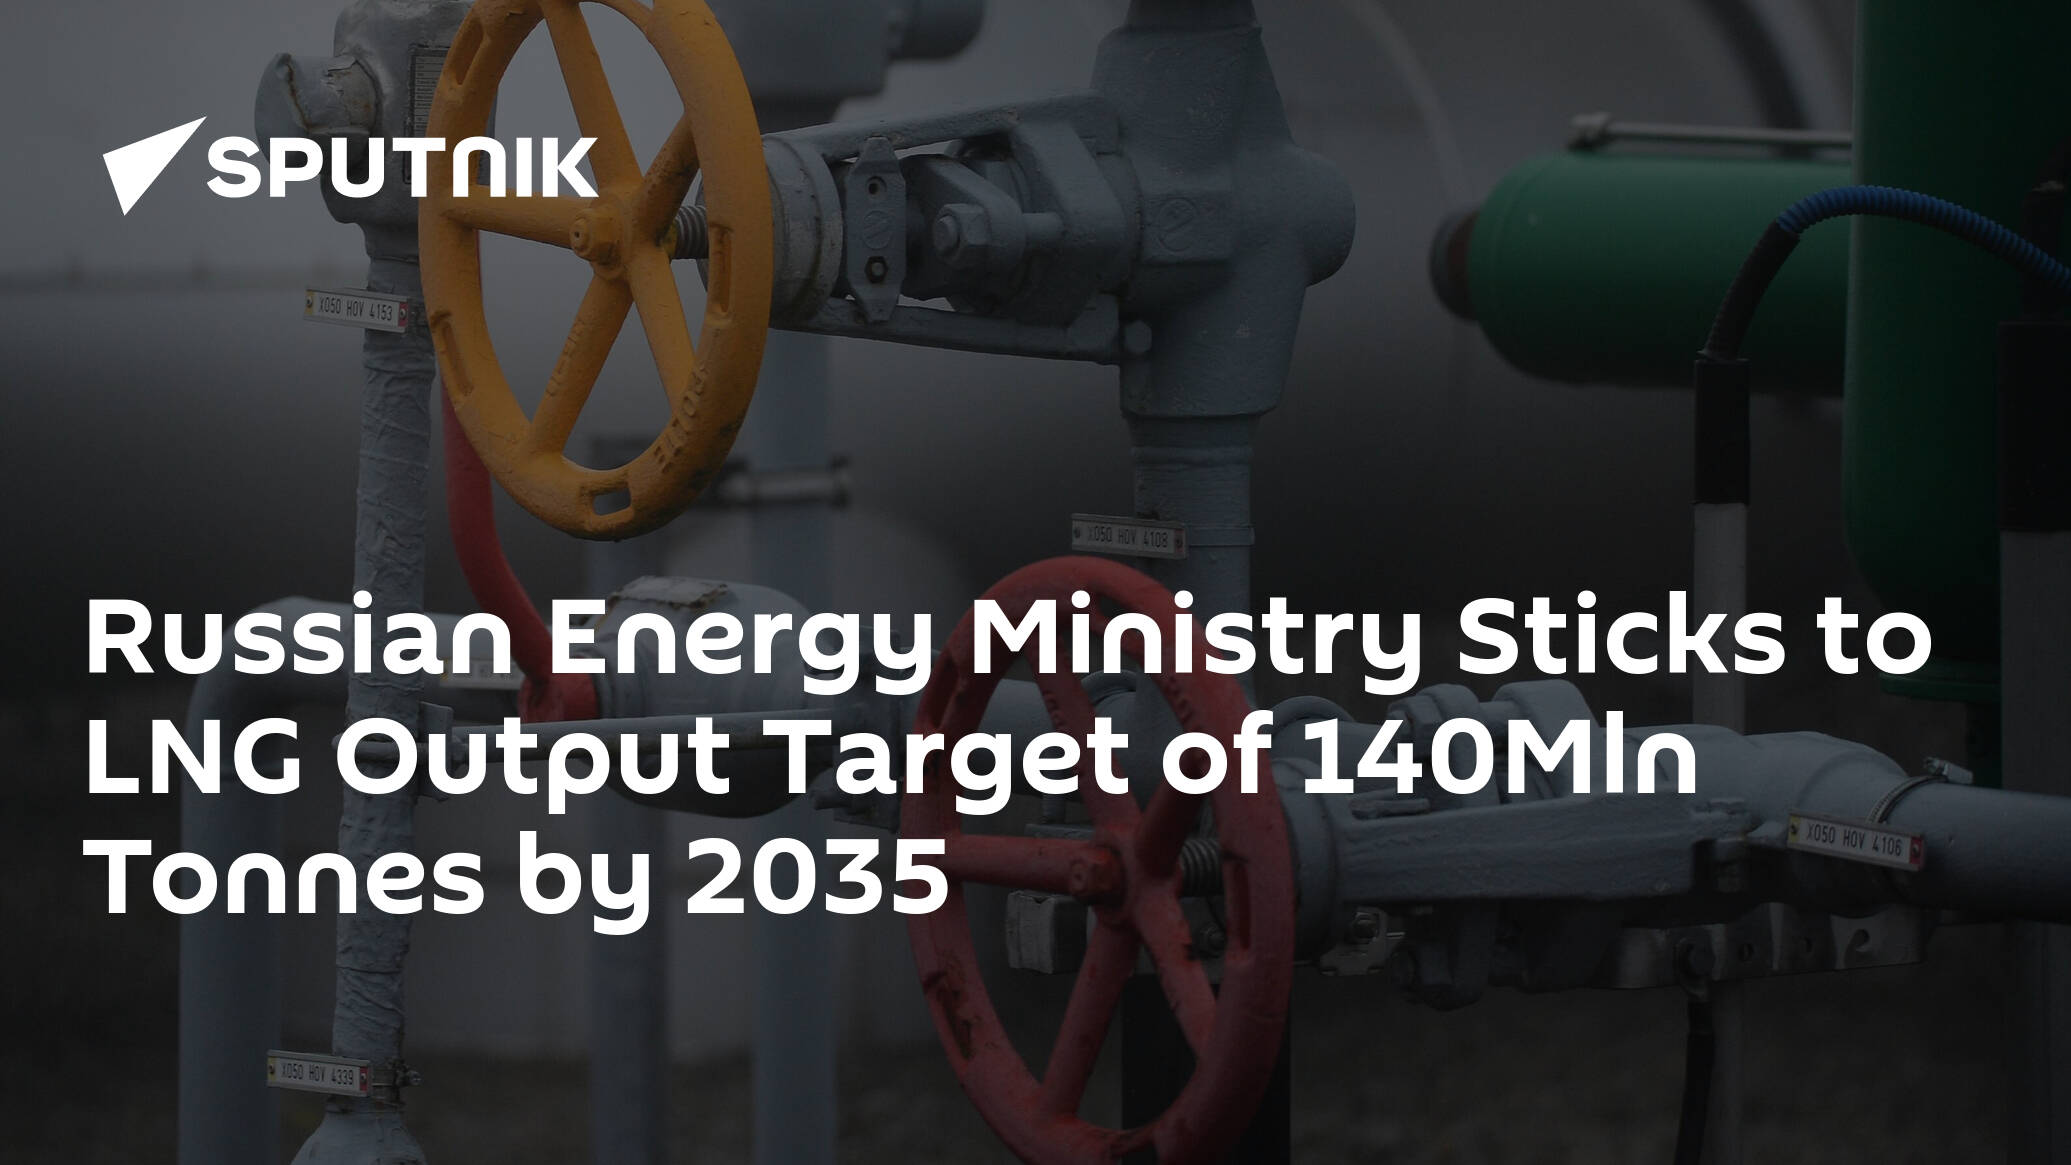 Russian Energy Ministry Sticks to LNG Output Target of 140Mln Tonnes by 2035